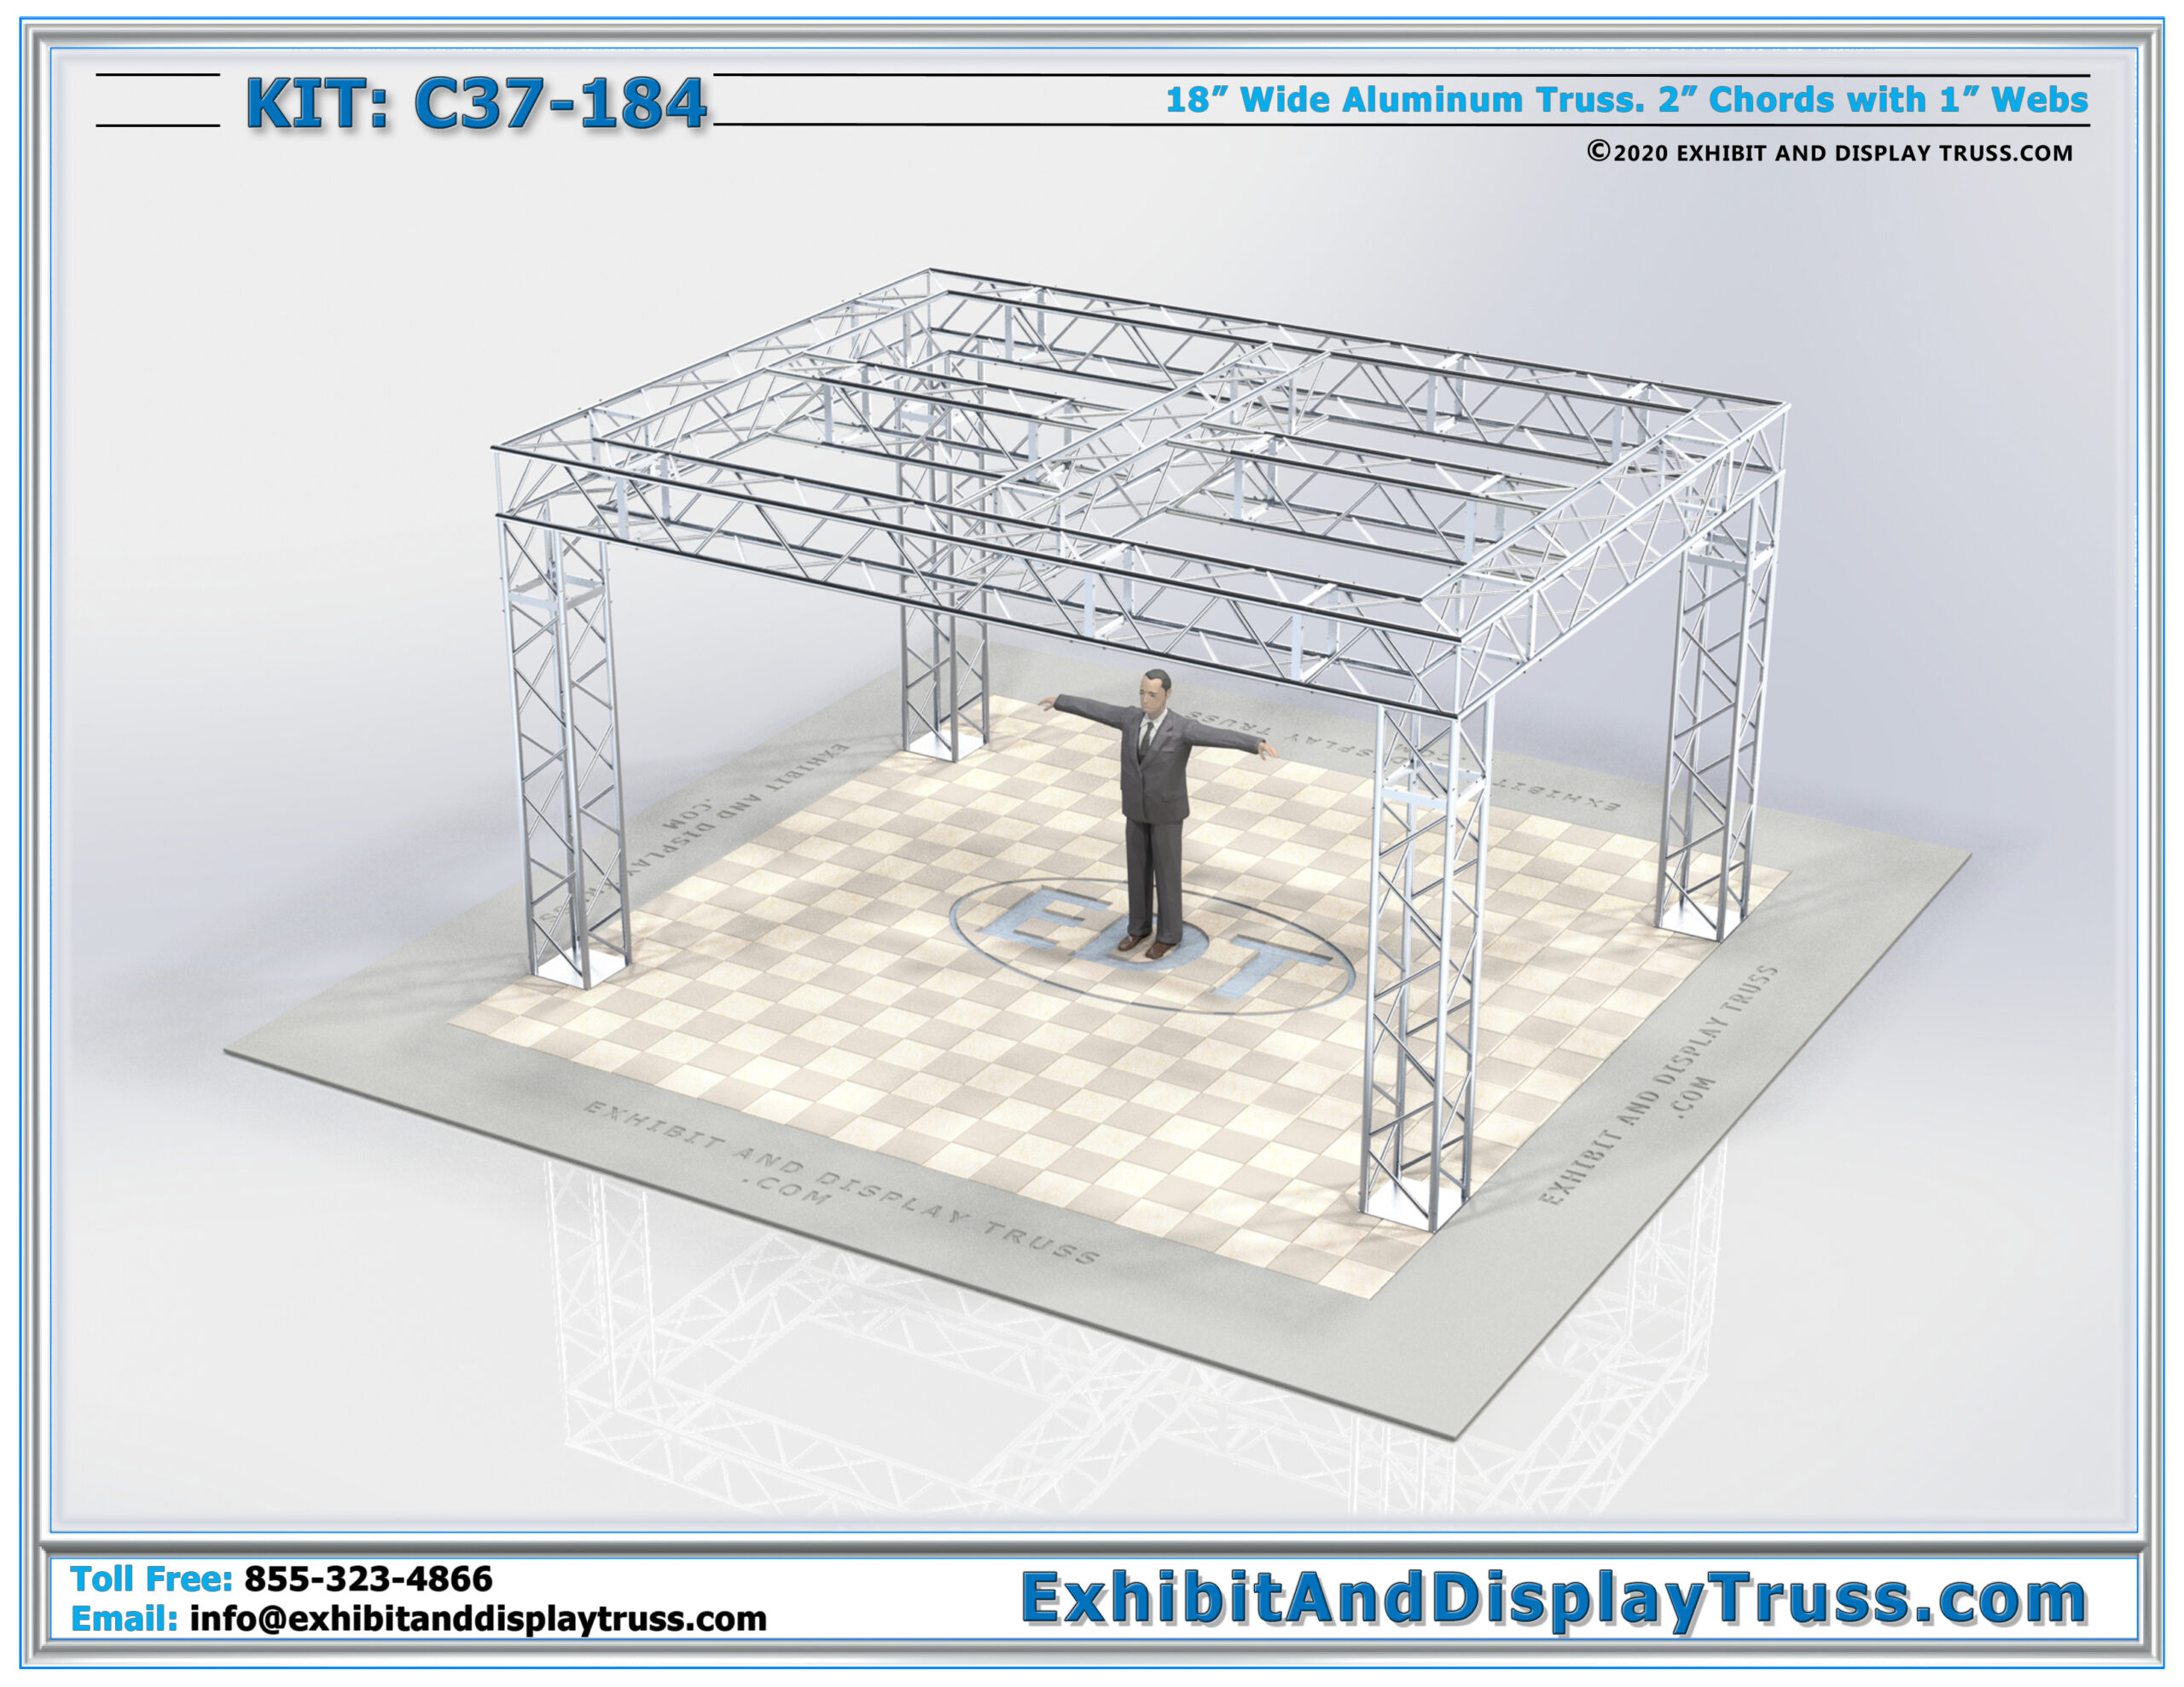 Kit: C37-184 / Heavy Duty Truss System and Trade Show Exhibit Display